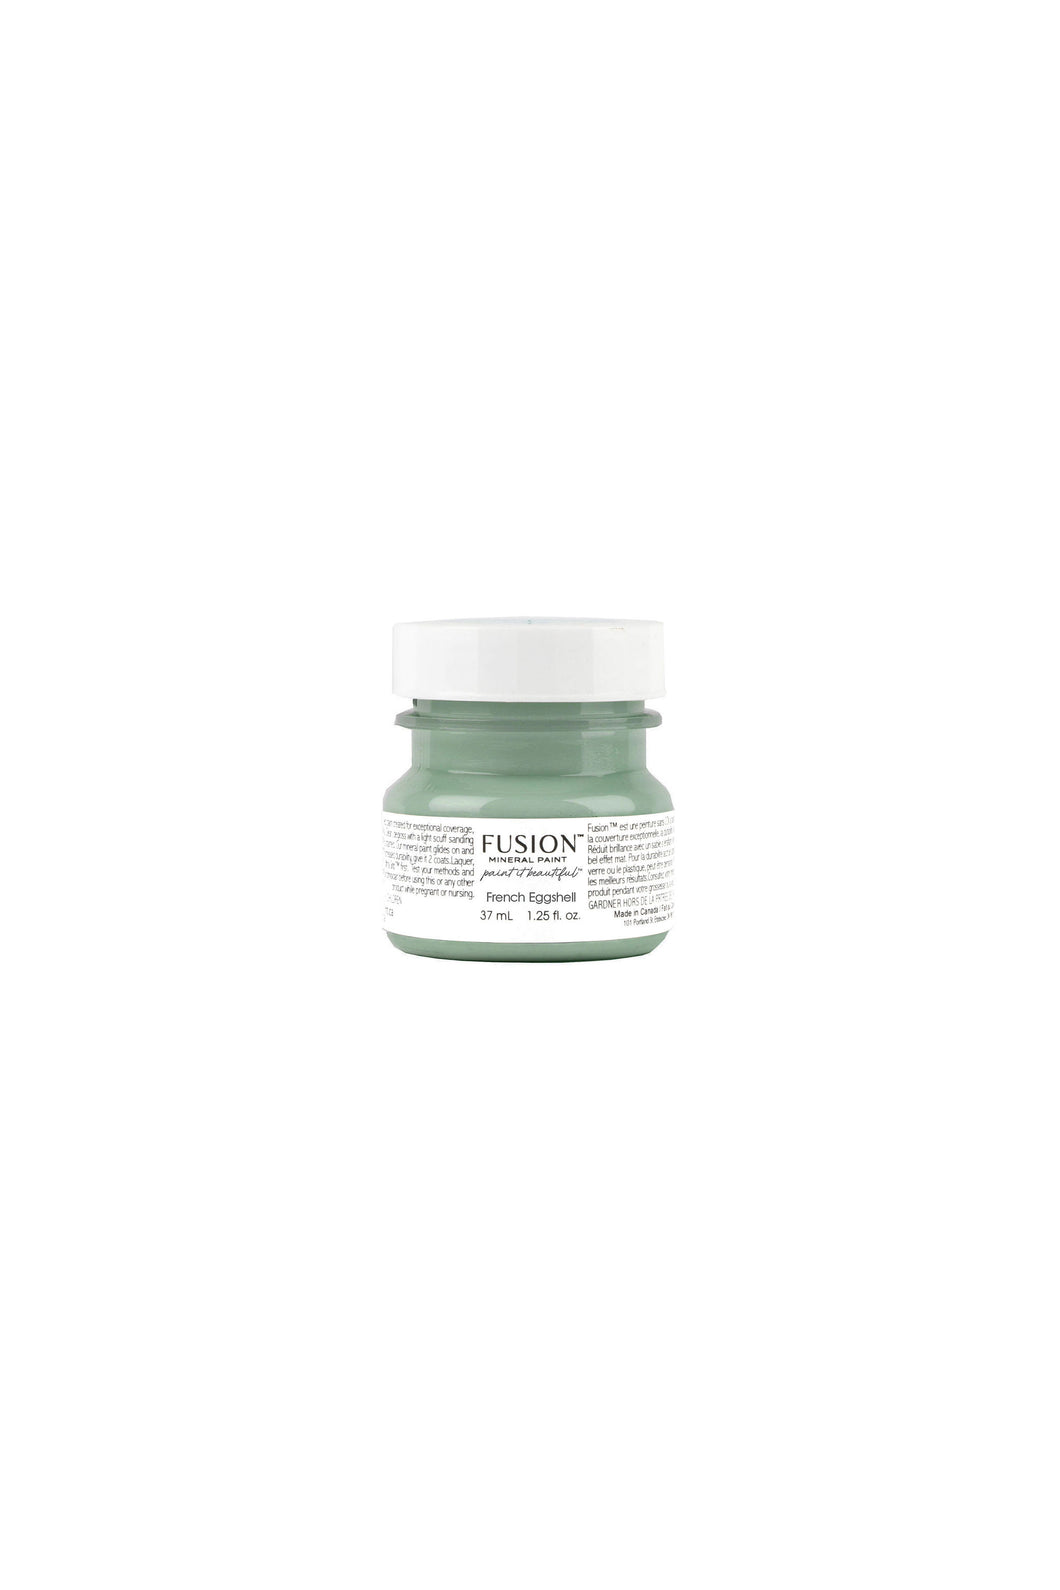 Fusion Mineral Paint - French Eggshell 37 ml Jar